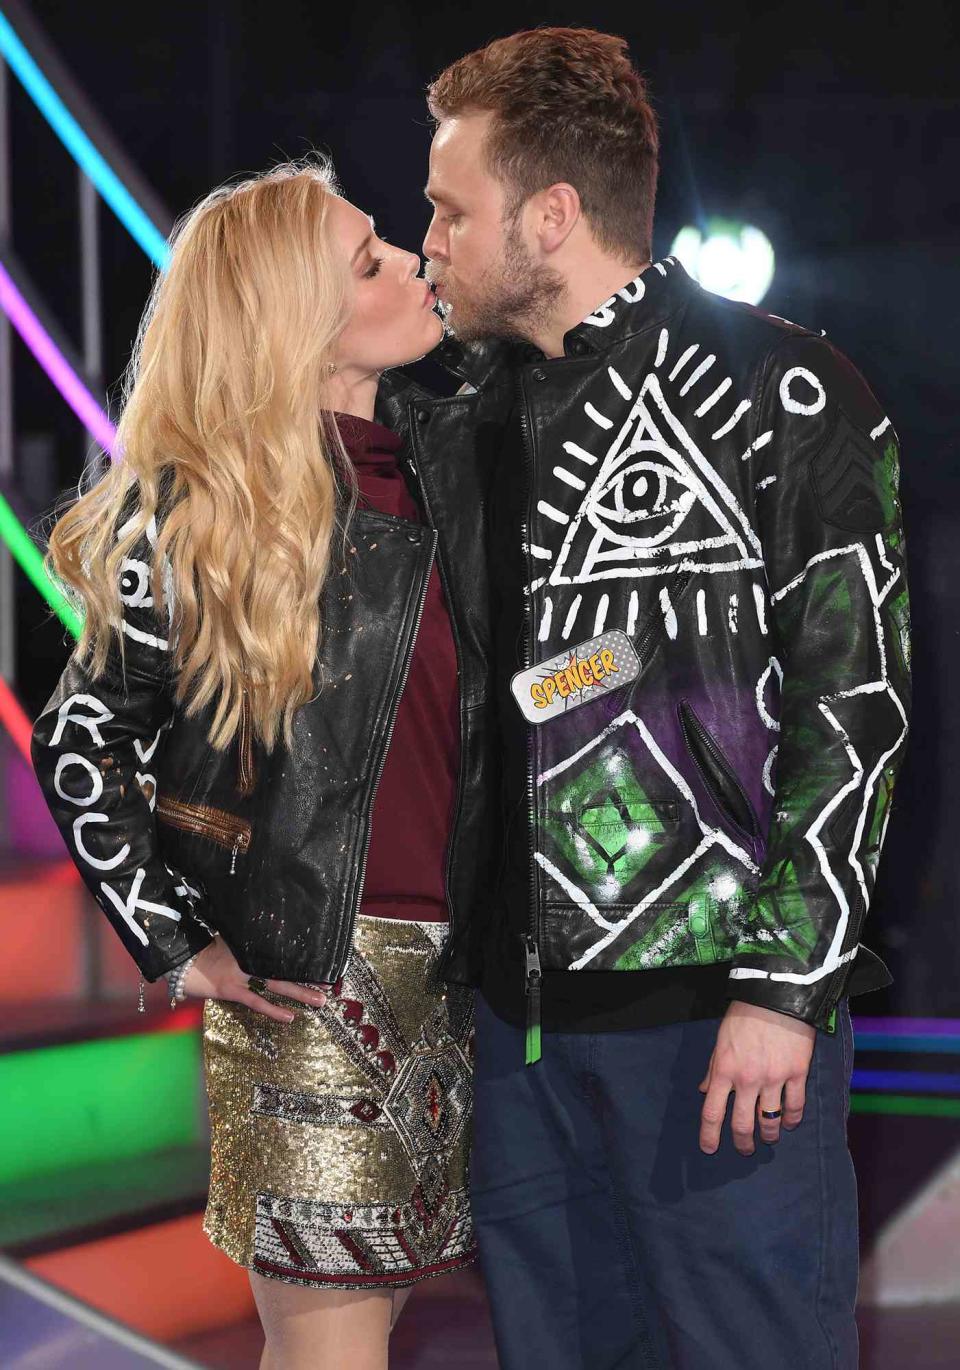 Heidi Montag and Spencer Pratt are the 8th housemates evicted from the Celebrity Big Brother house at Elstree Studios on January 27, 2017 in Borehamwood, England